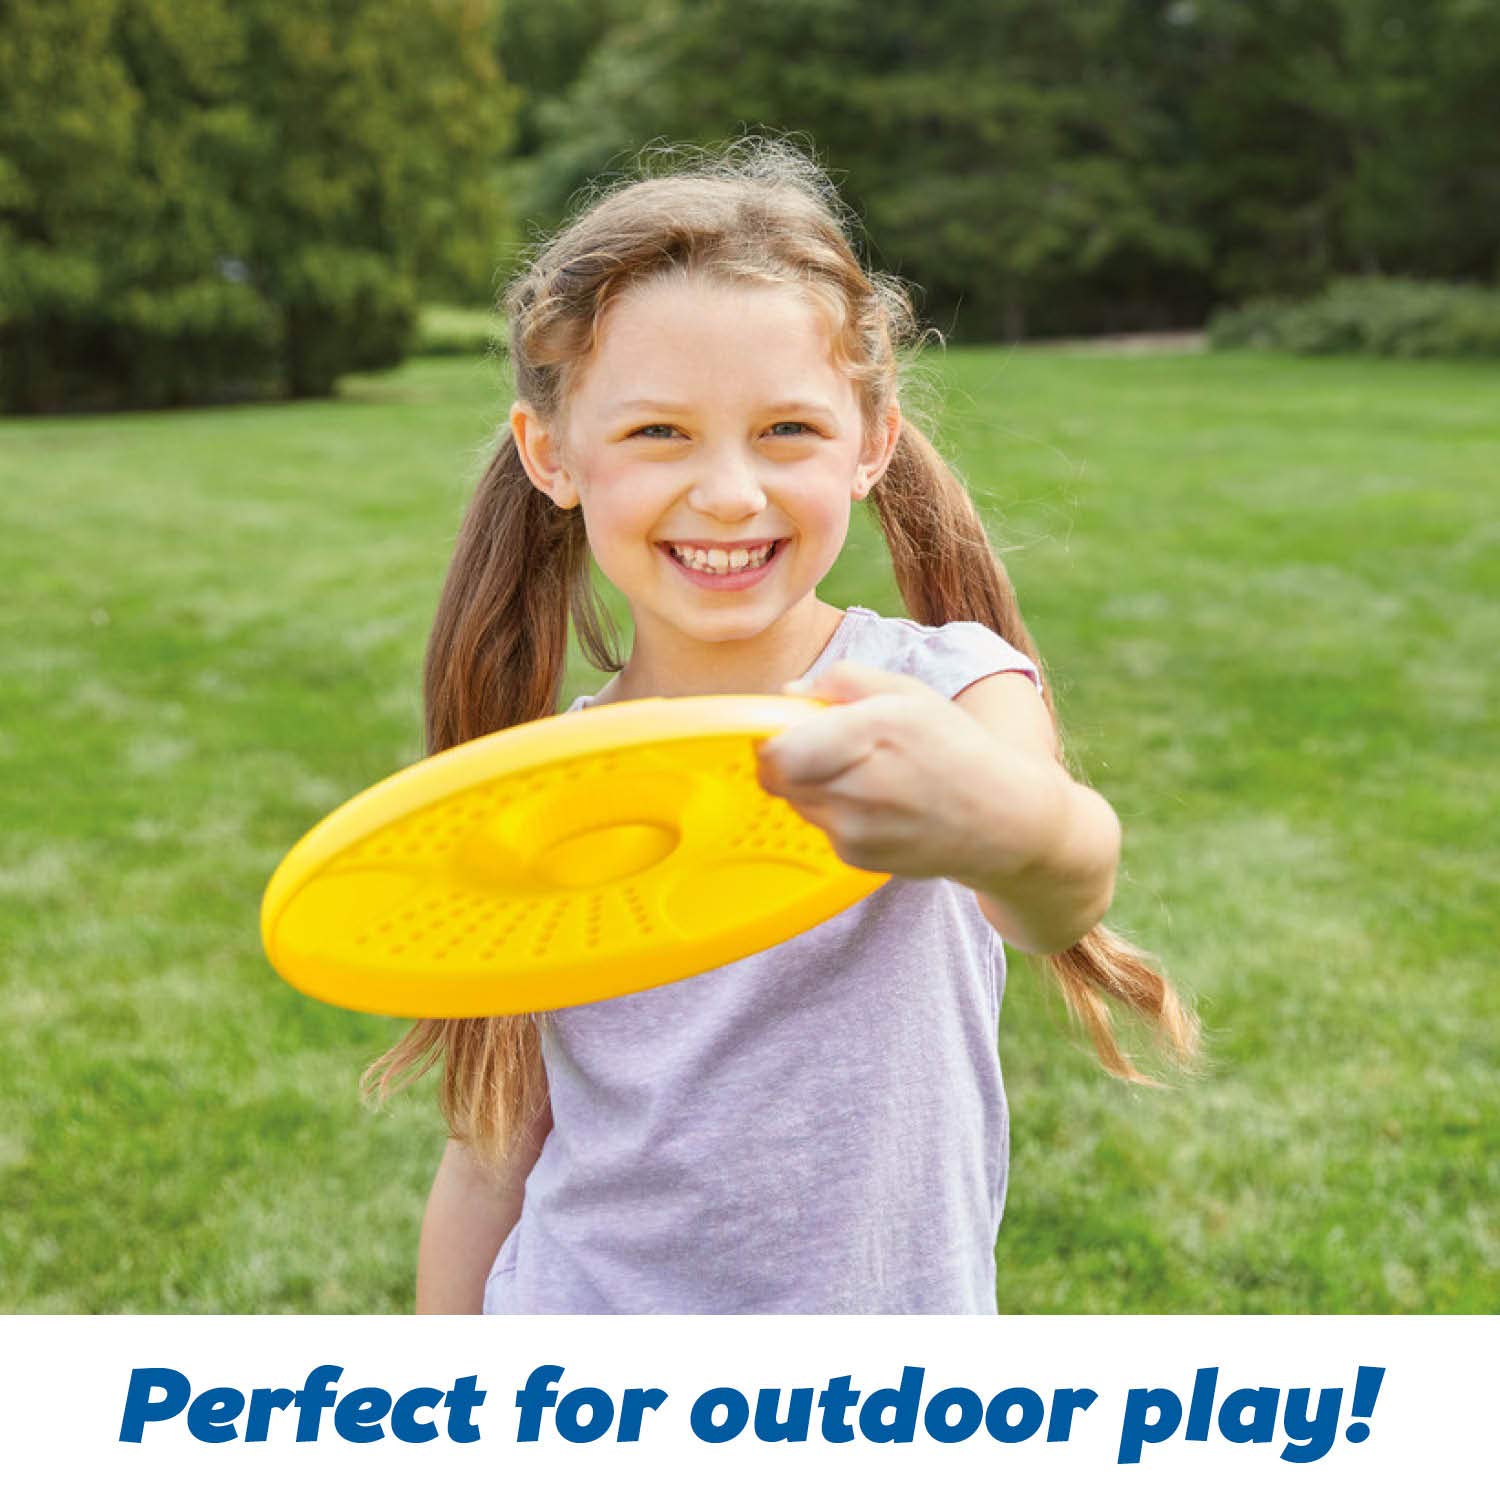 Kidoozie Fly n Spin Disc, Colors Vary, Promotes Outdoor Play, for Children Ages 5 and up, Multi